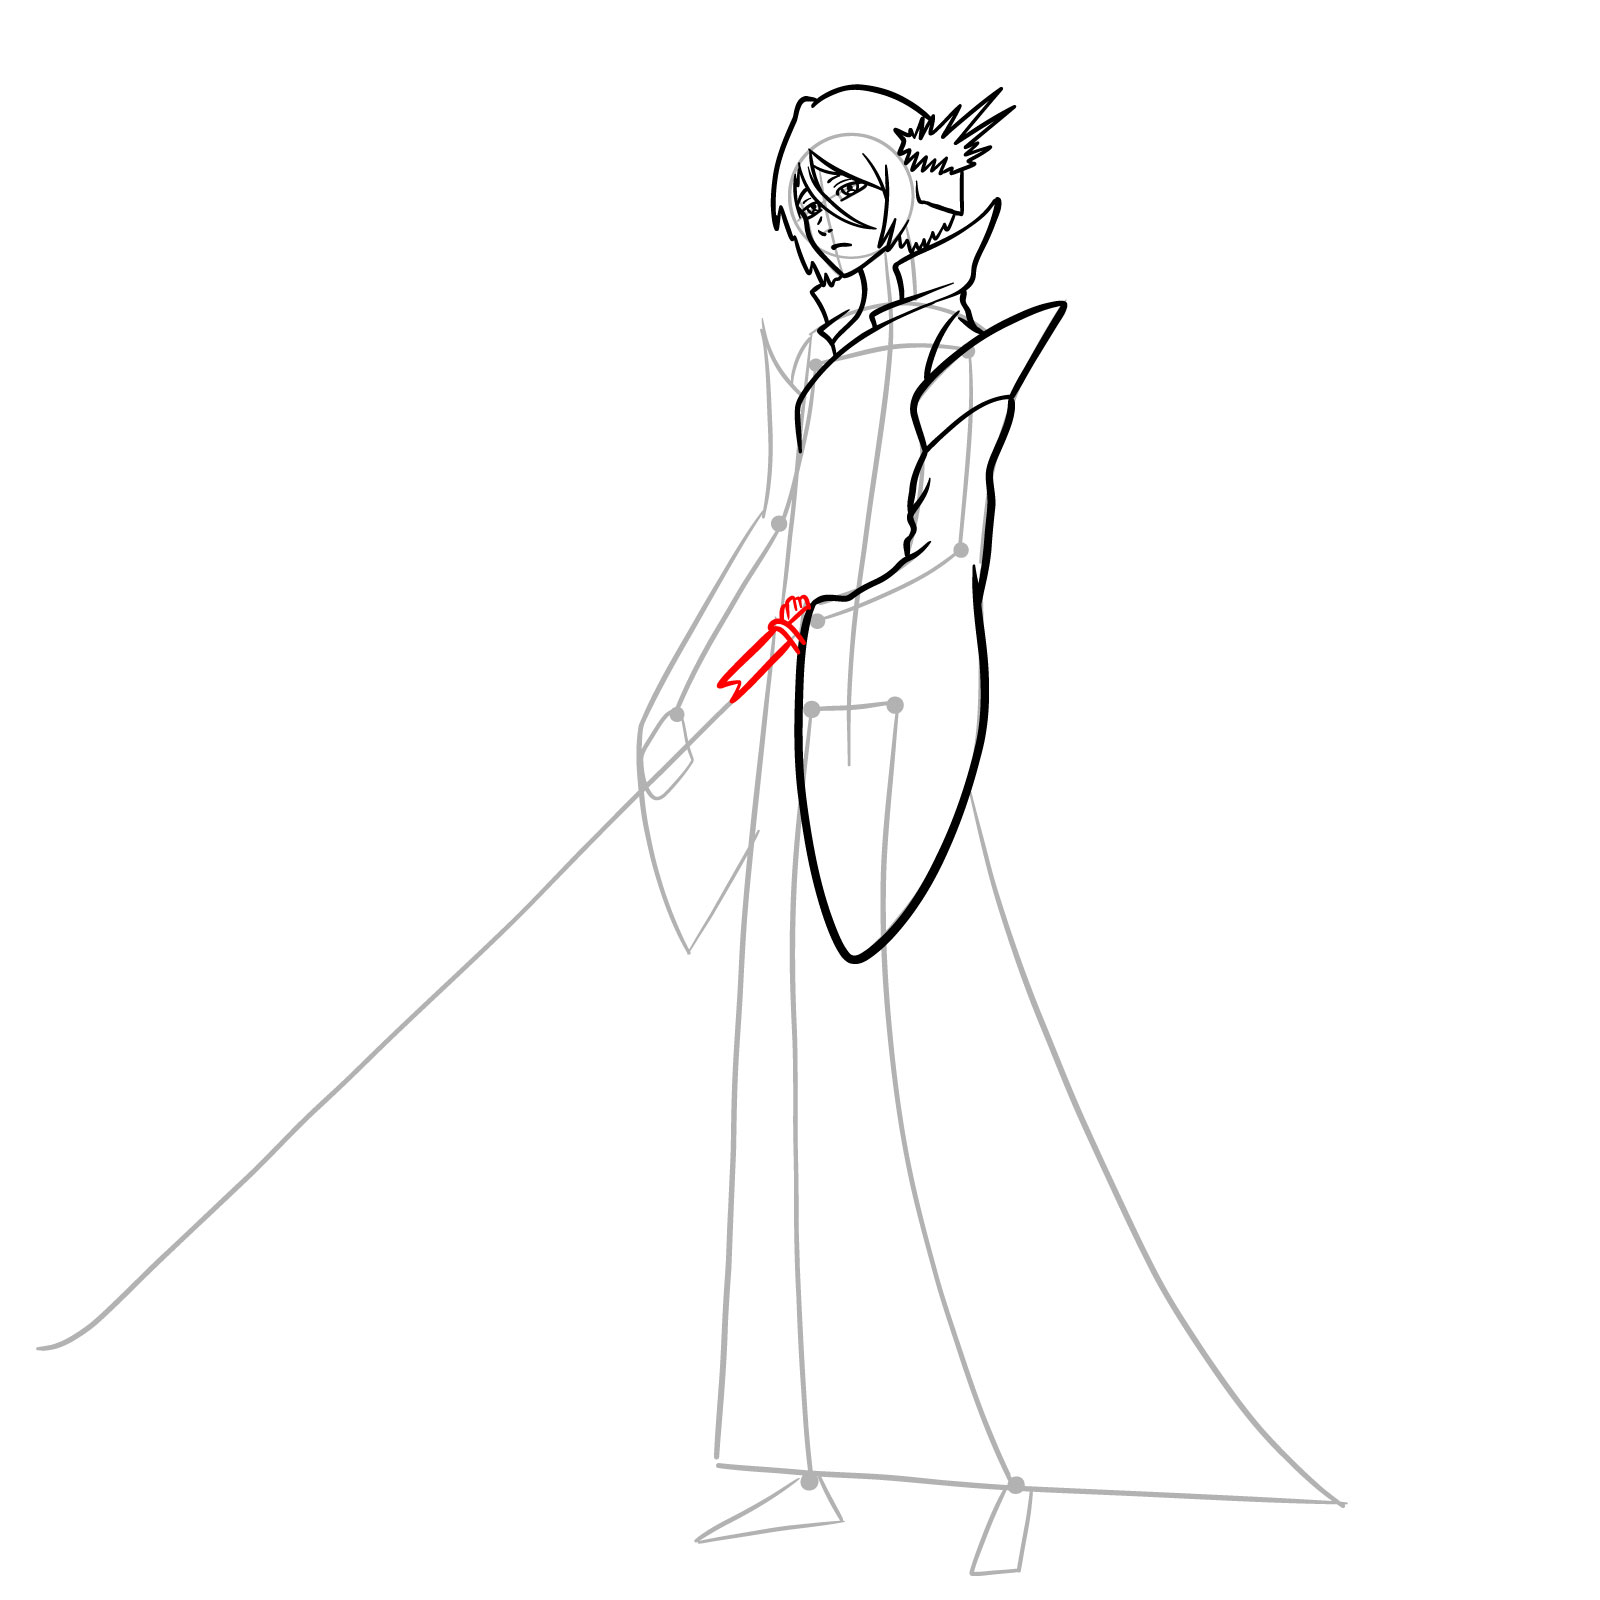 Sketch of Rukia's left hand holding onto a weapon handle. - step 14